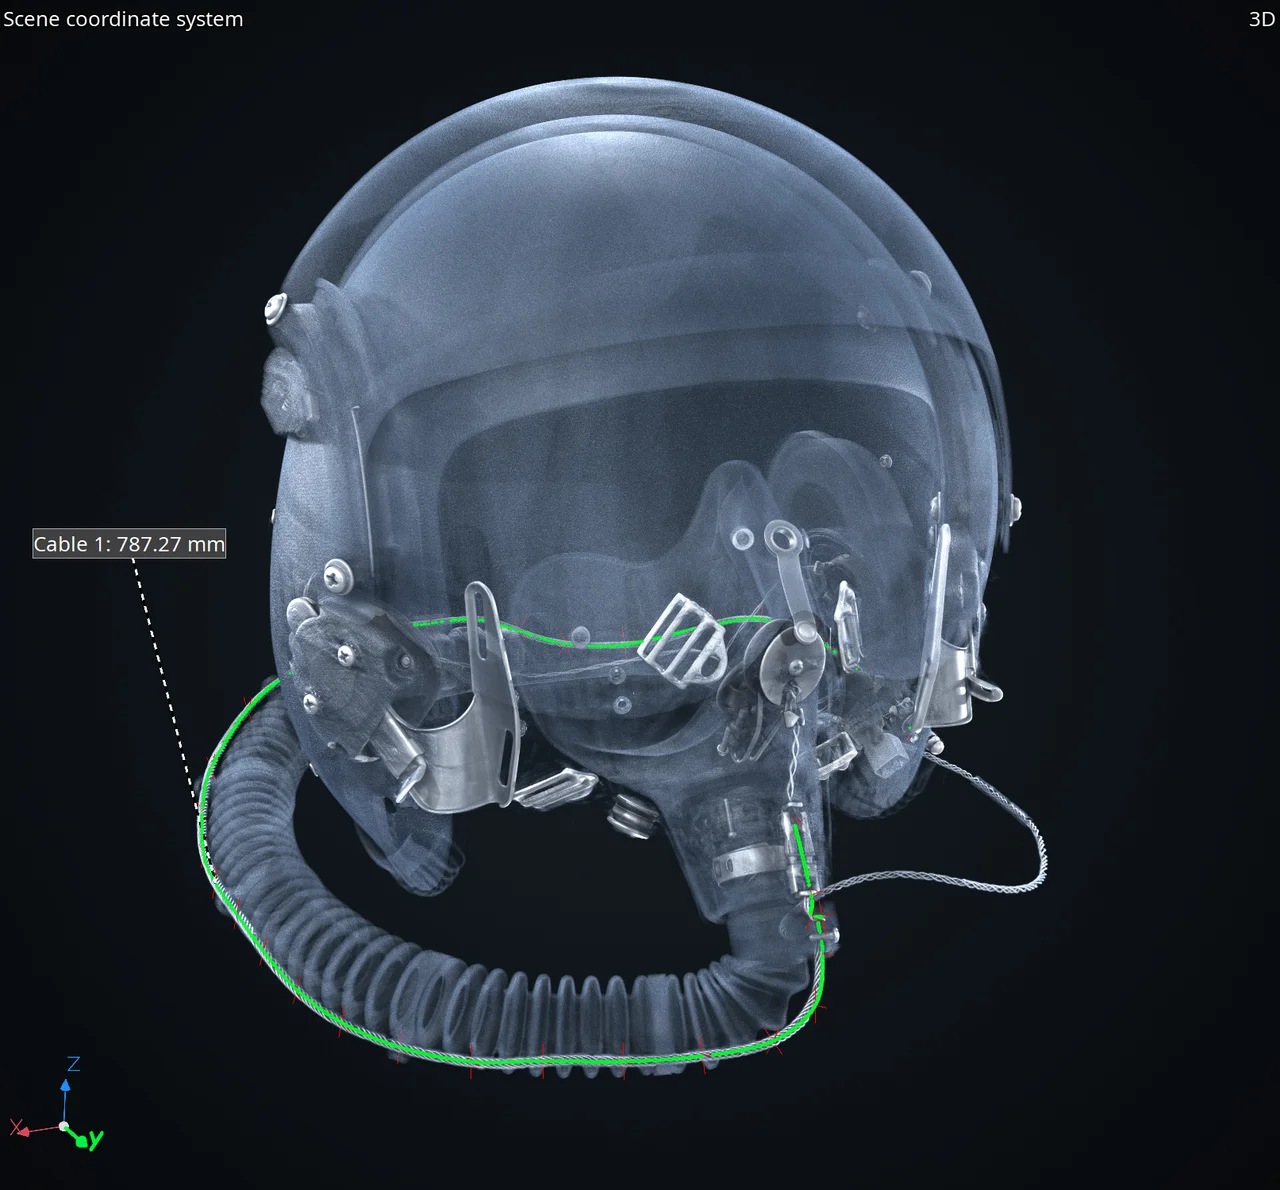 Pilot helmet with polyline set along cable inside breathing tube